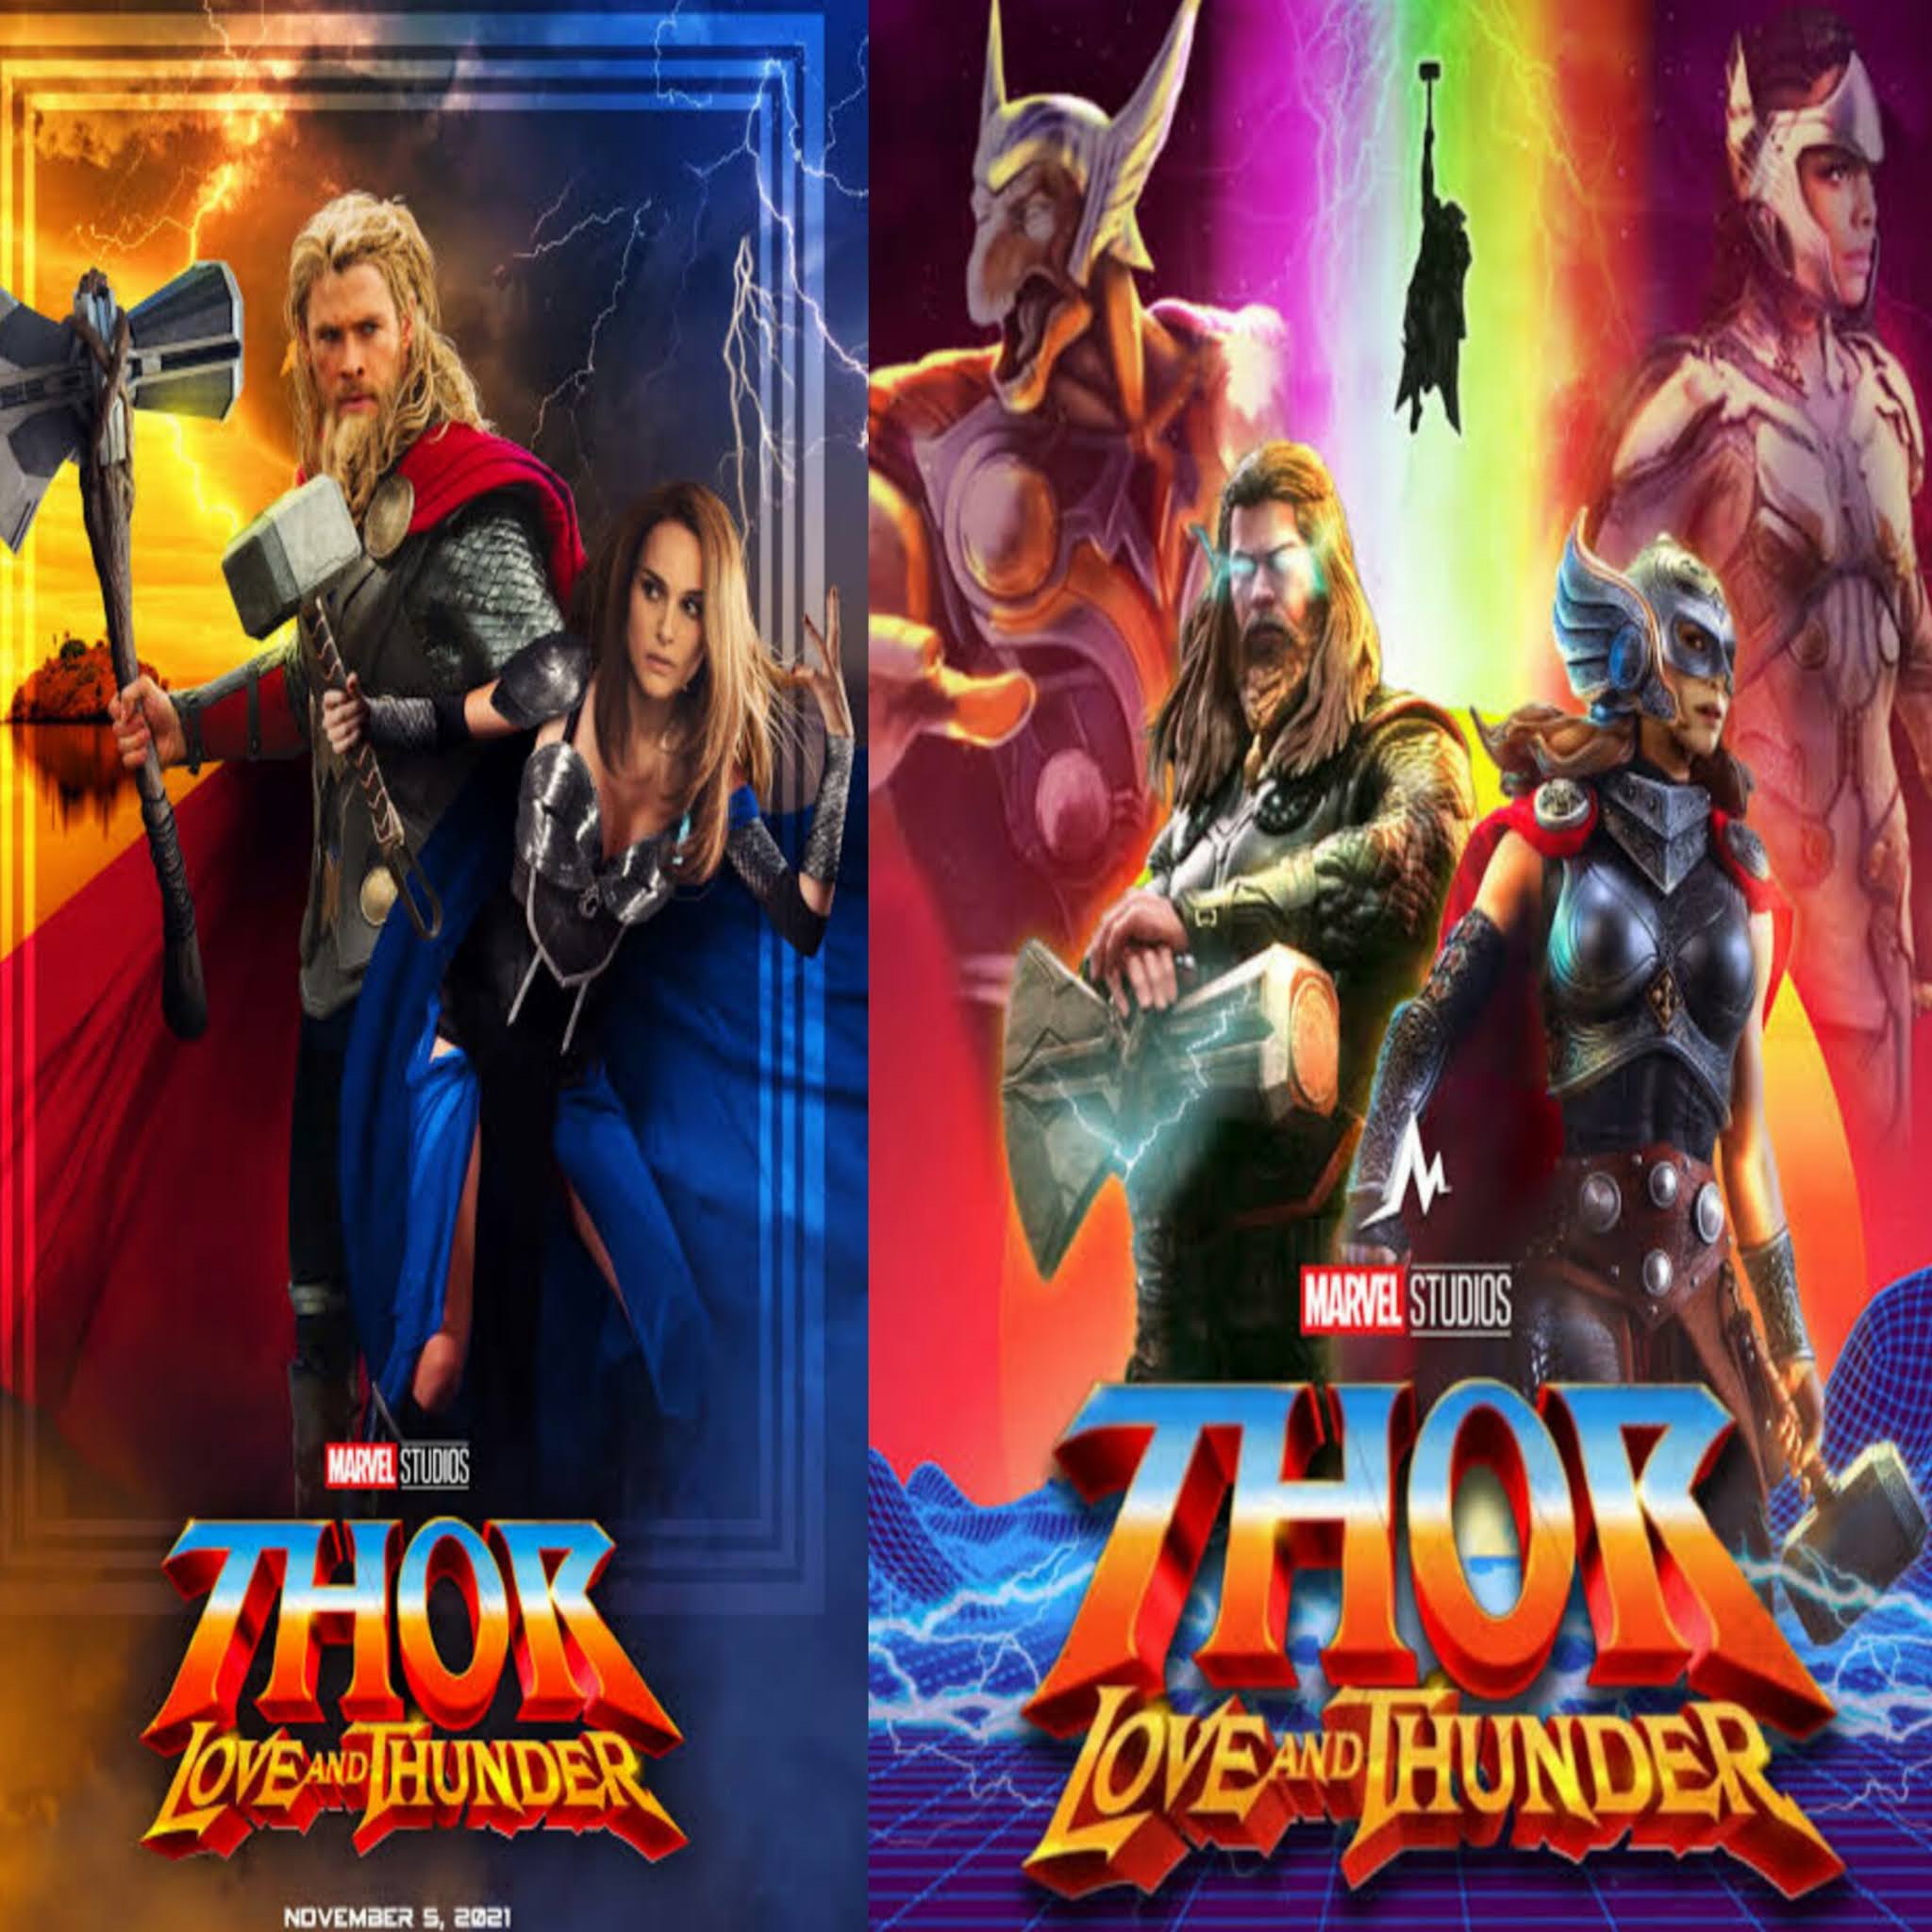 Thor Love And Thunder: The first show will start at 12.15 pm, Marvel\'s film Thor - Love and Thunder will run continuously for 96 hours